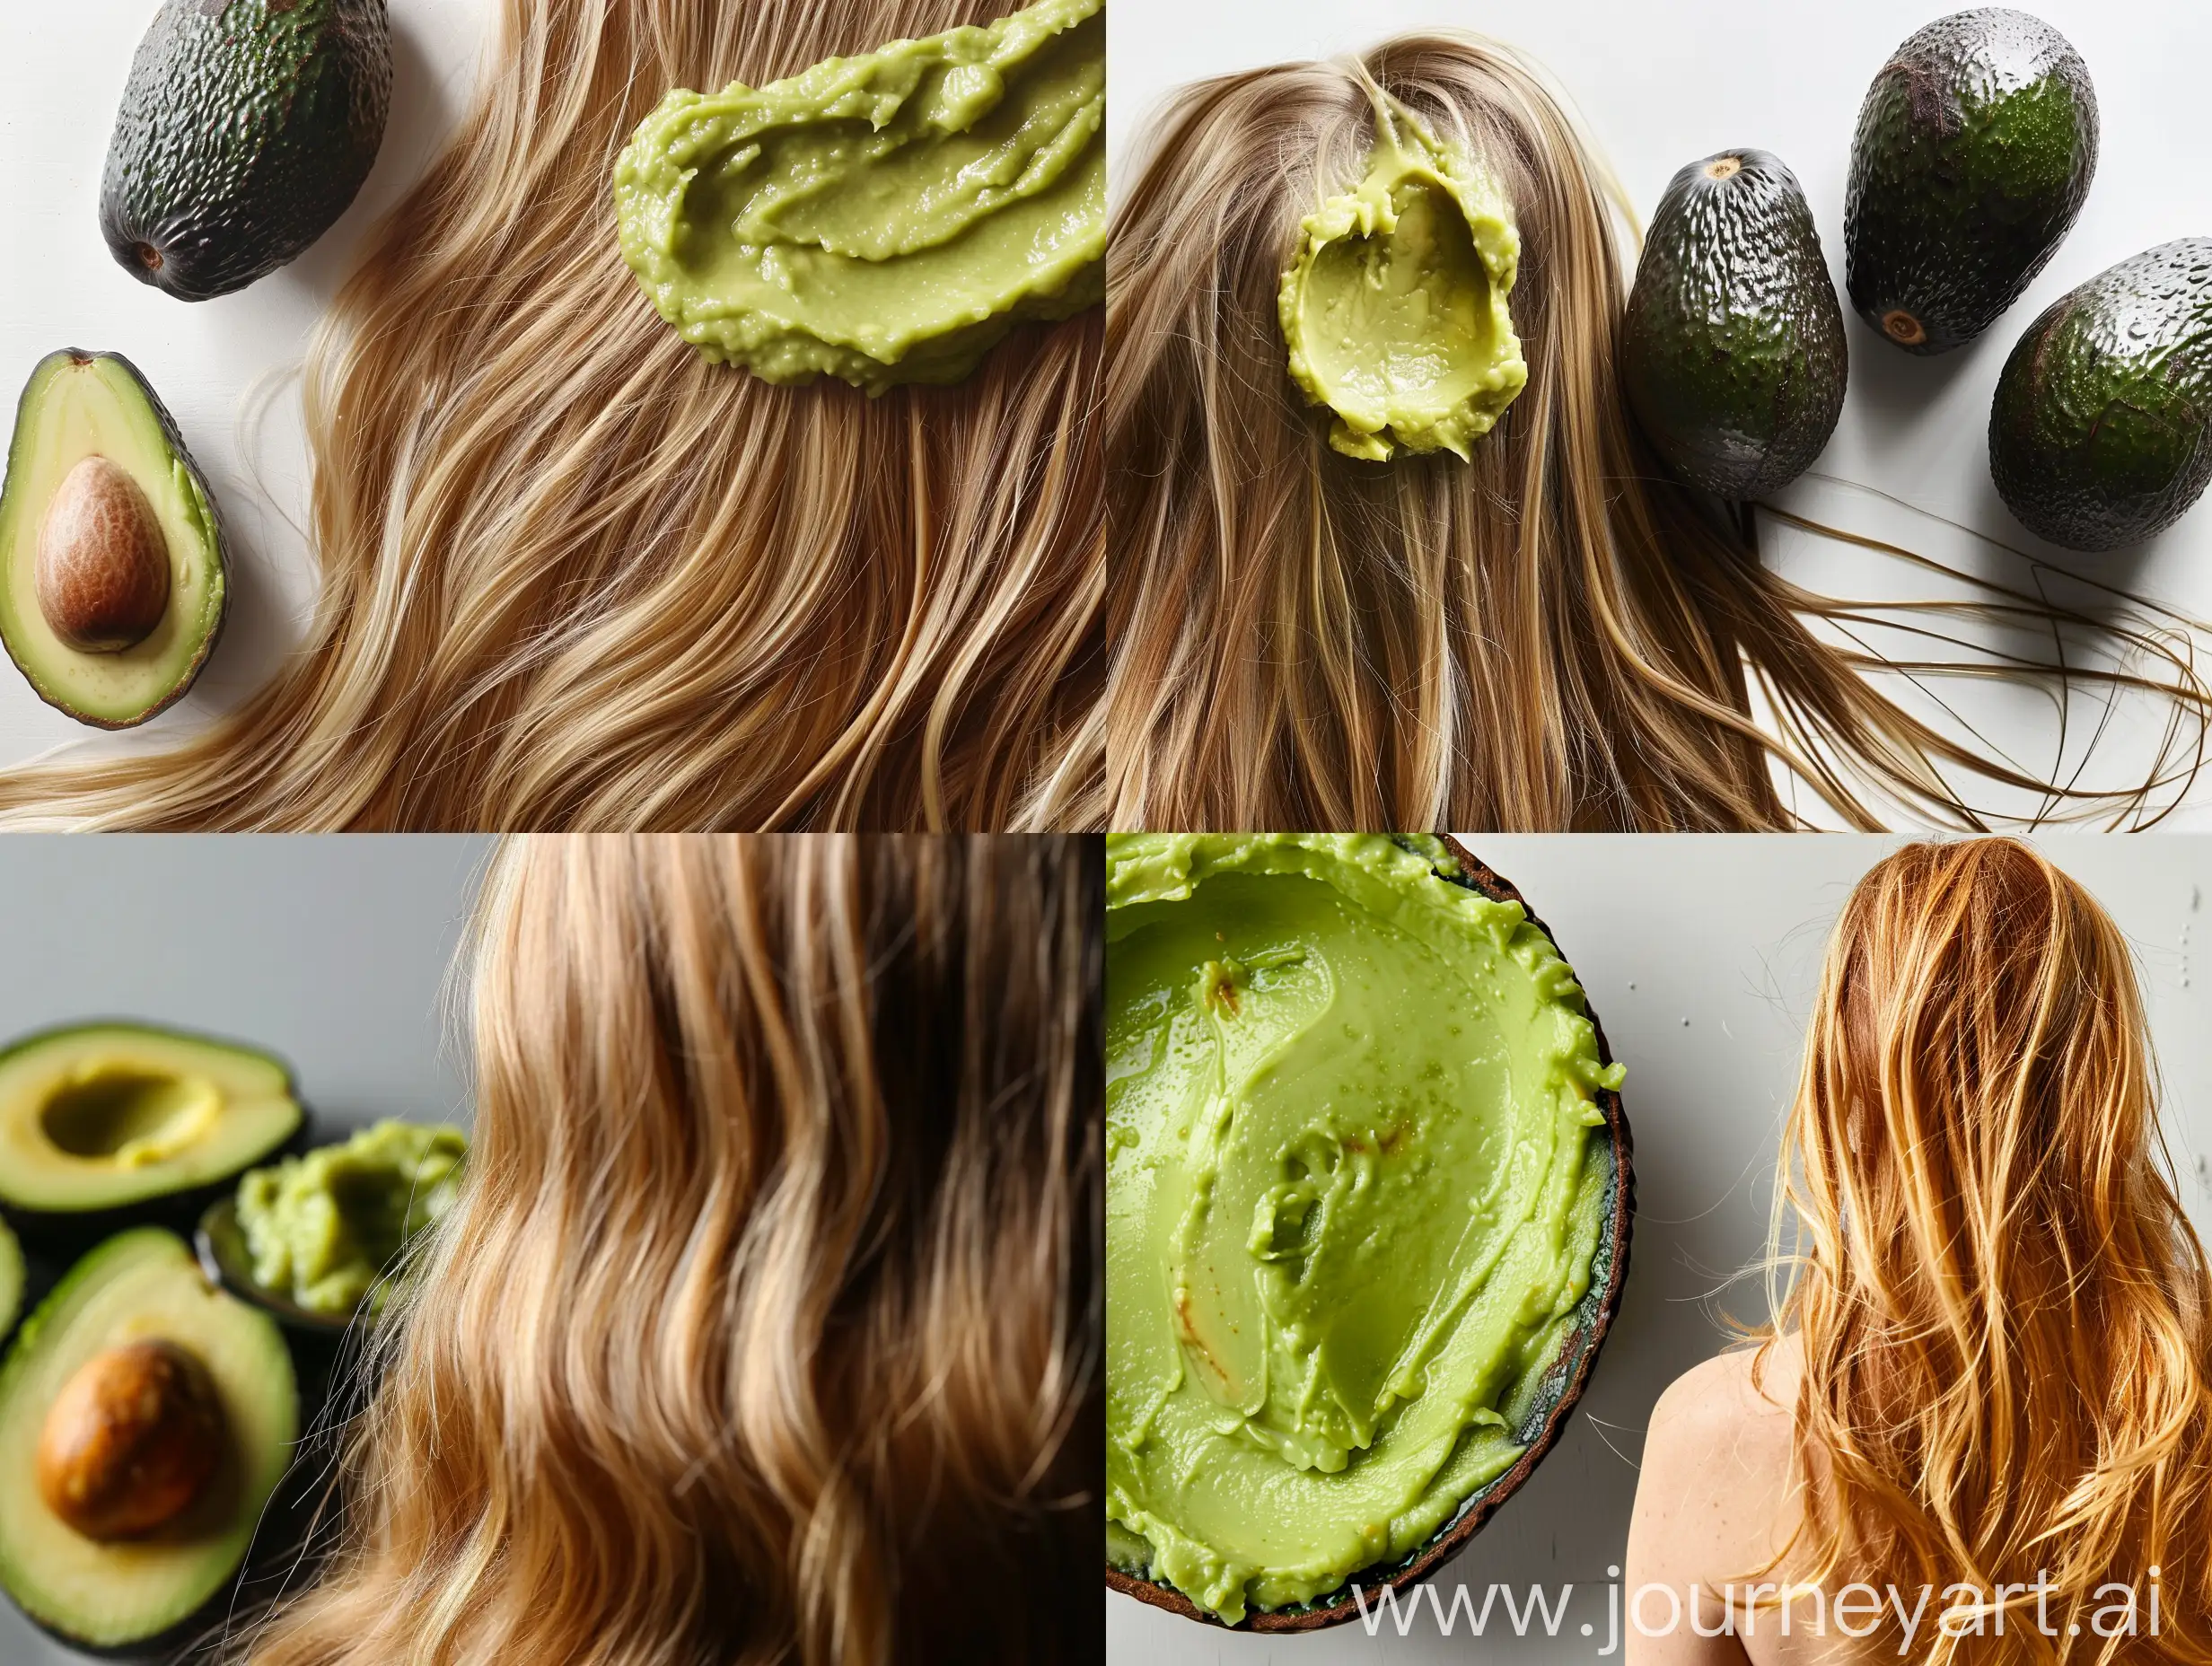 Real photo of a hair mask with avocado puree on a blonde woman's hair